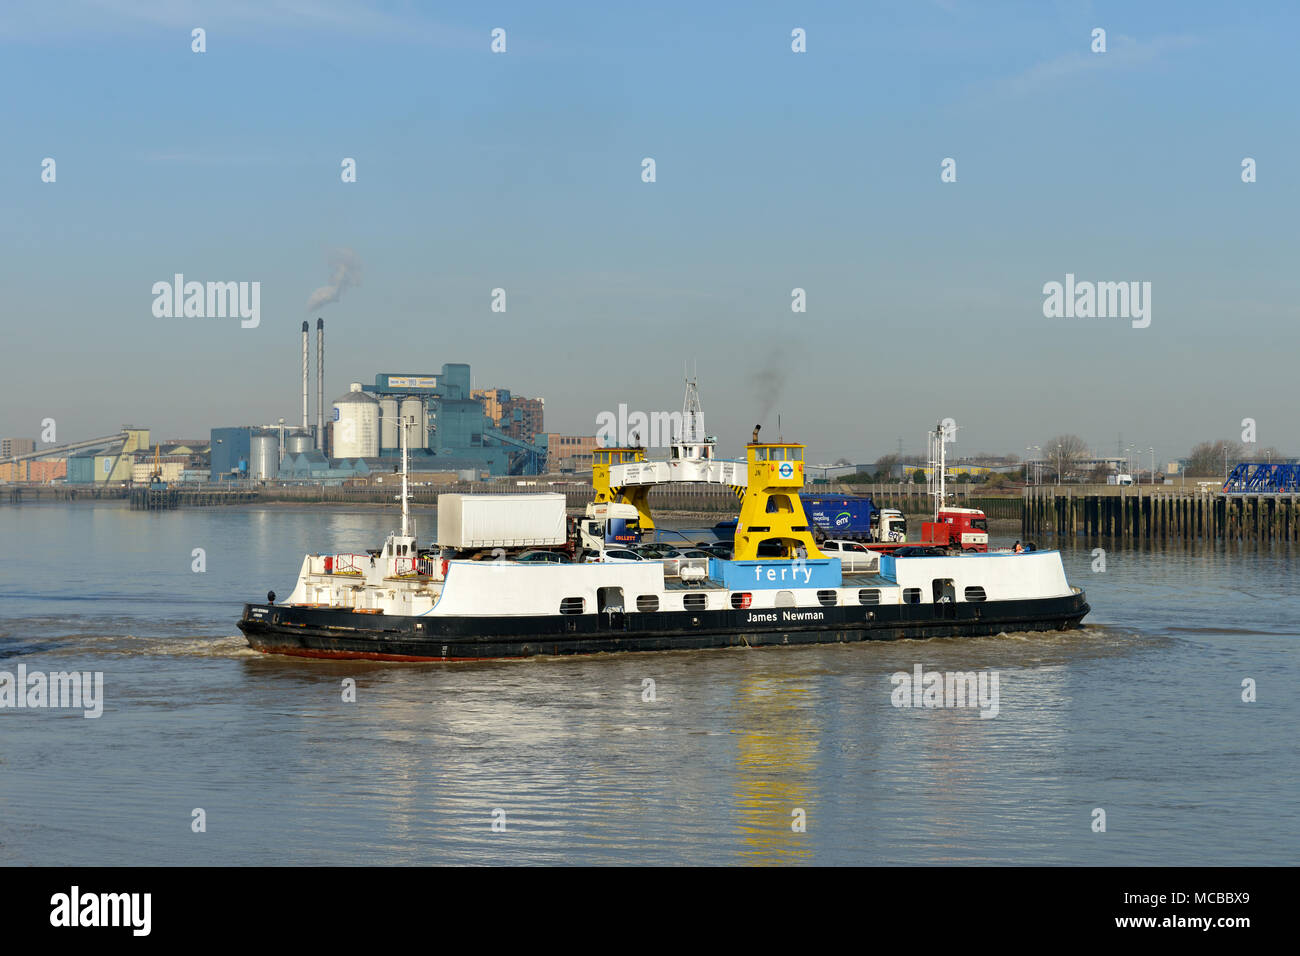 Woolwich Ferry, Thames River, East London, United Kingdom Stock Photo